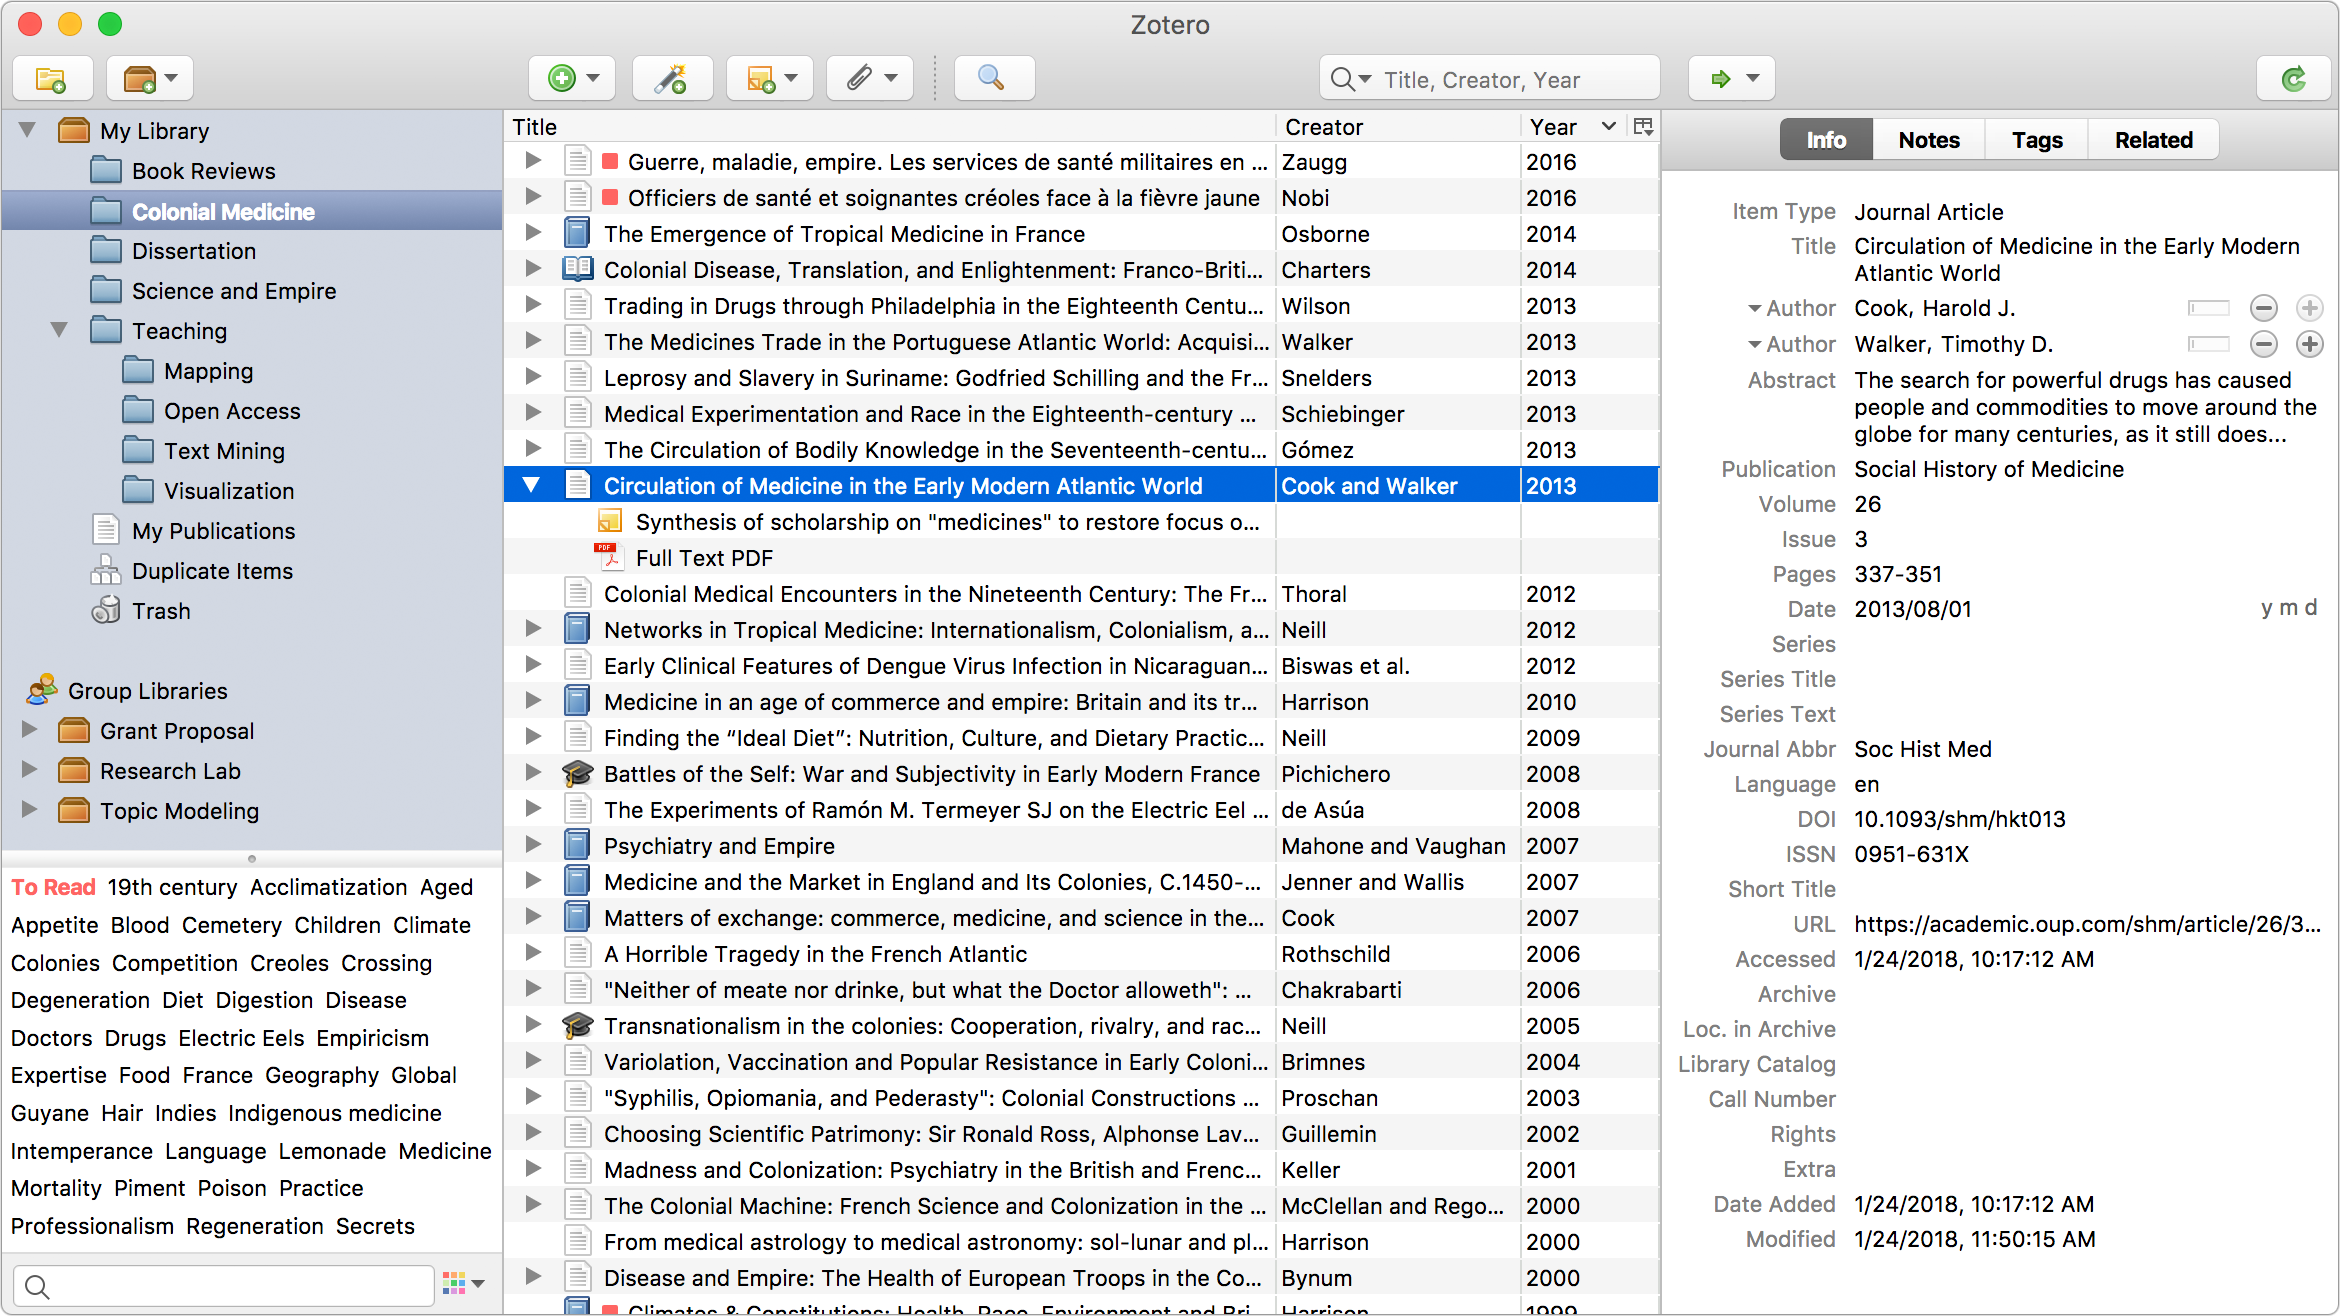 Screeshot of the MacOS app from Zotero.org